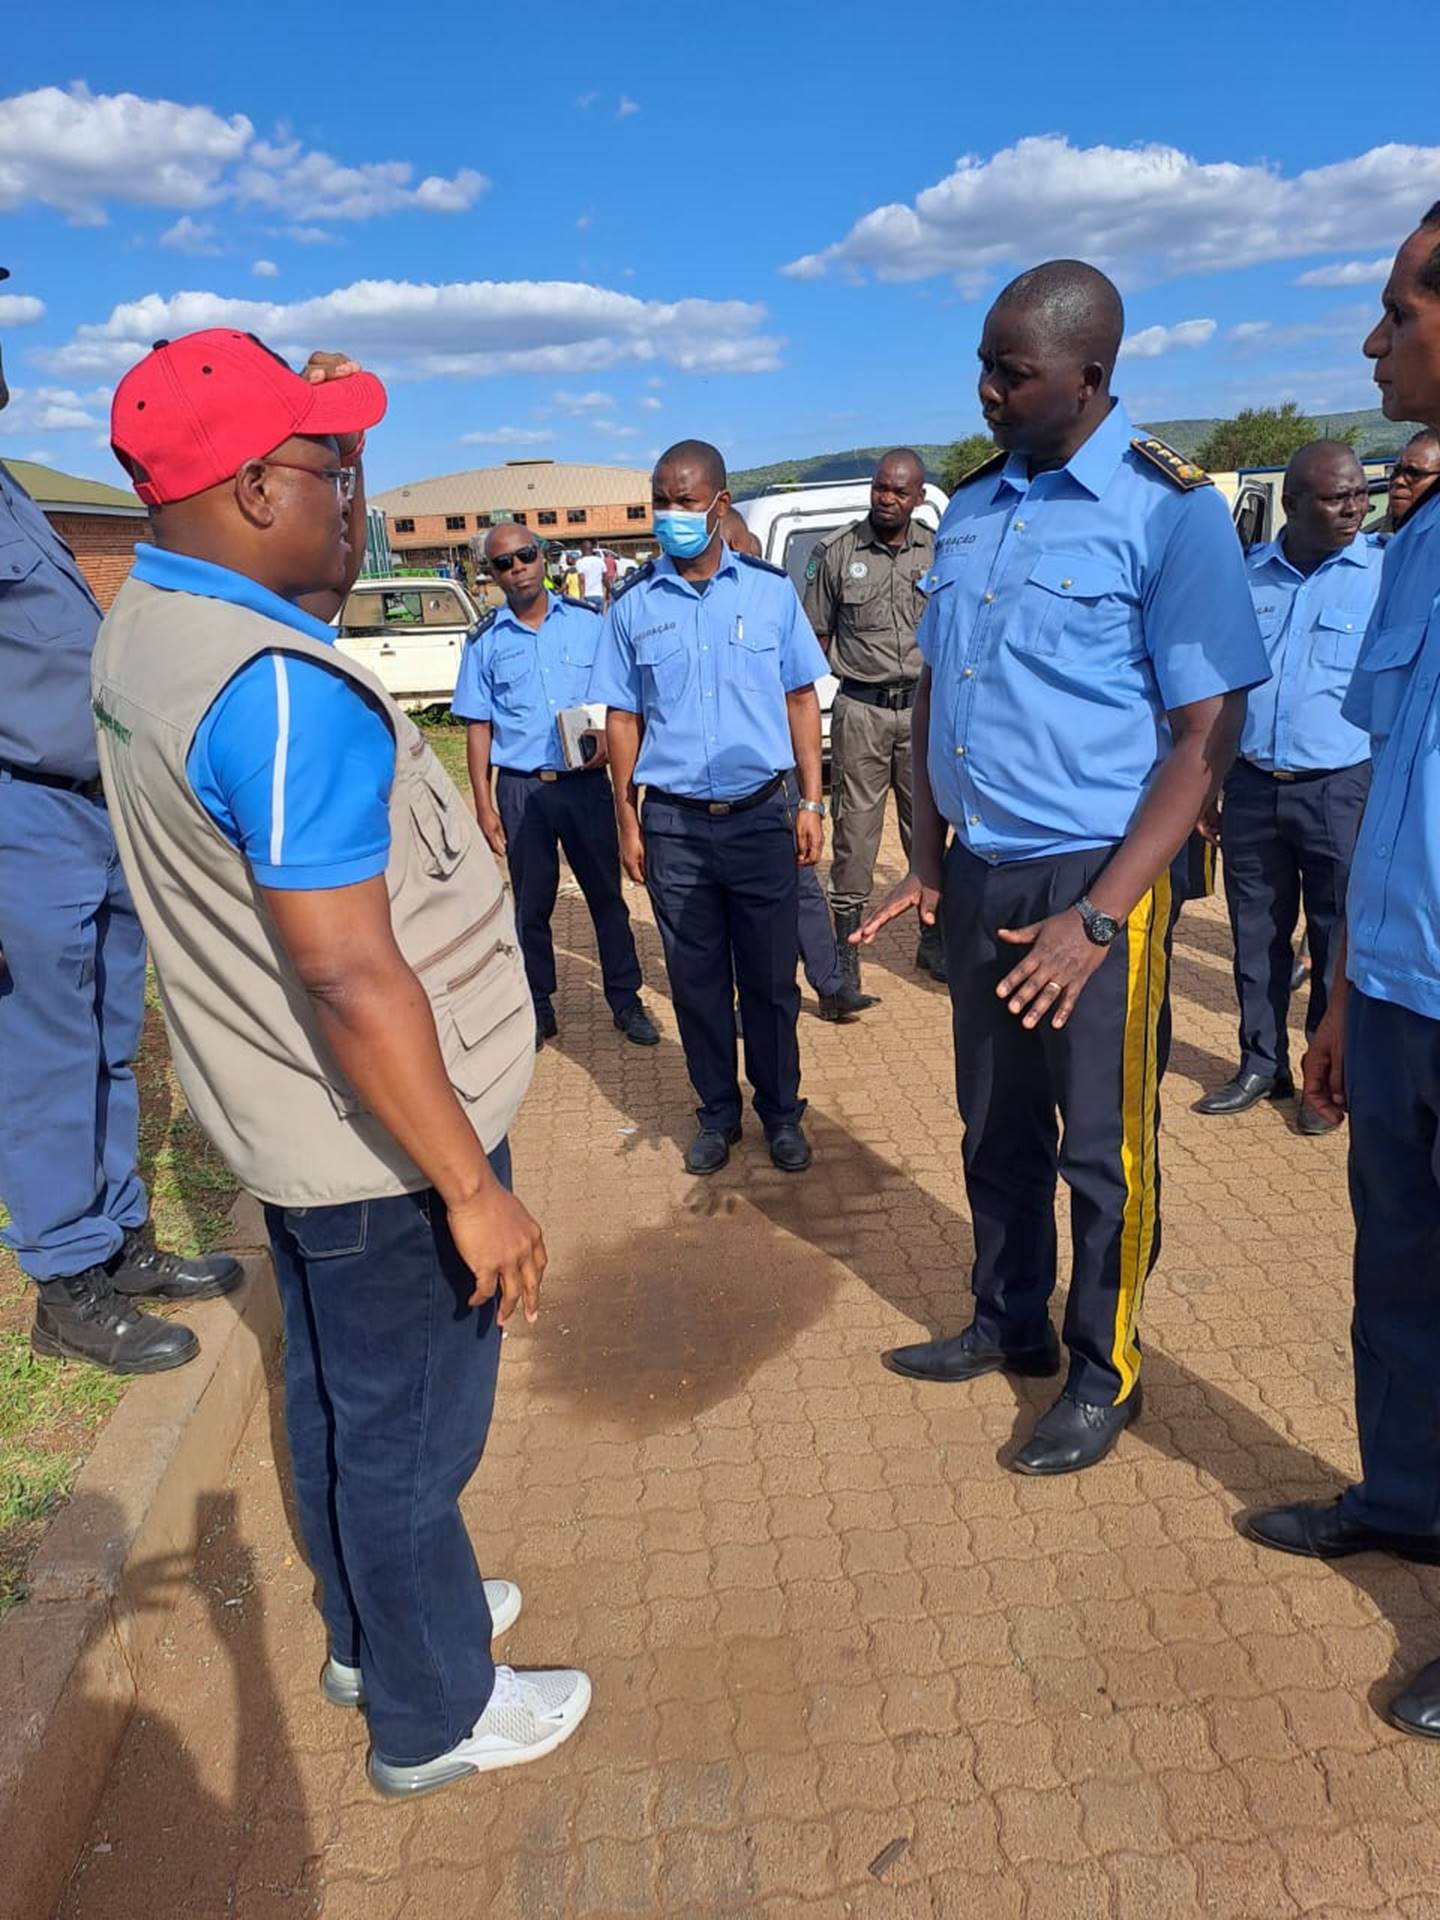 BMA Commissioner, Dr Michael Masiapato with Mozambique’s border authorities at Lebombo Port of Entry during the 2022/23 Festive Season.